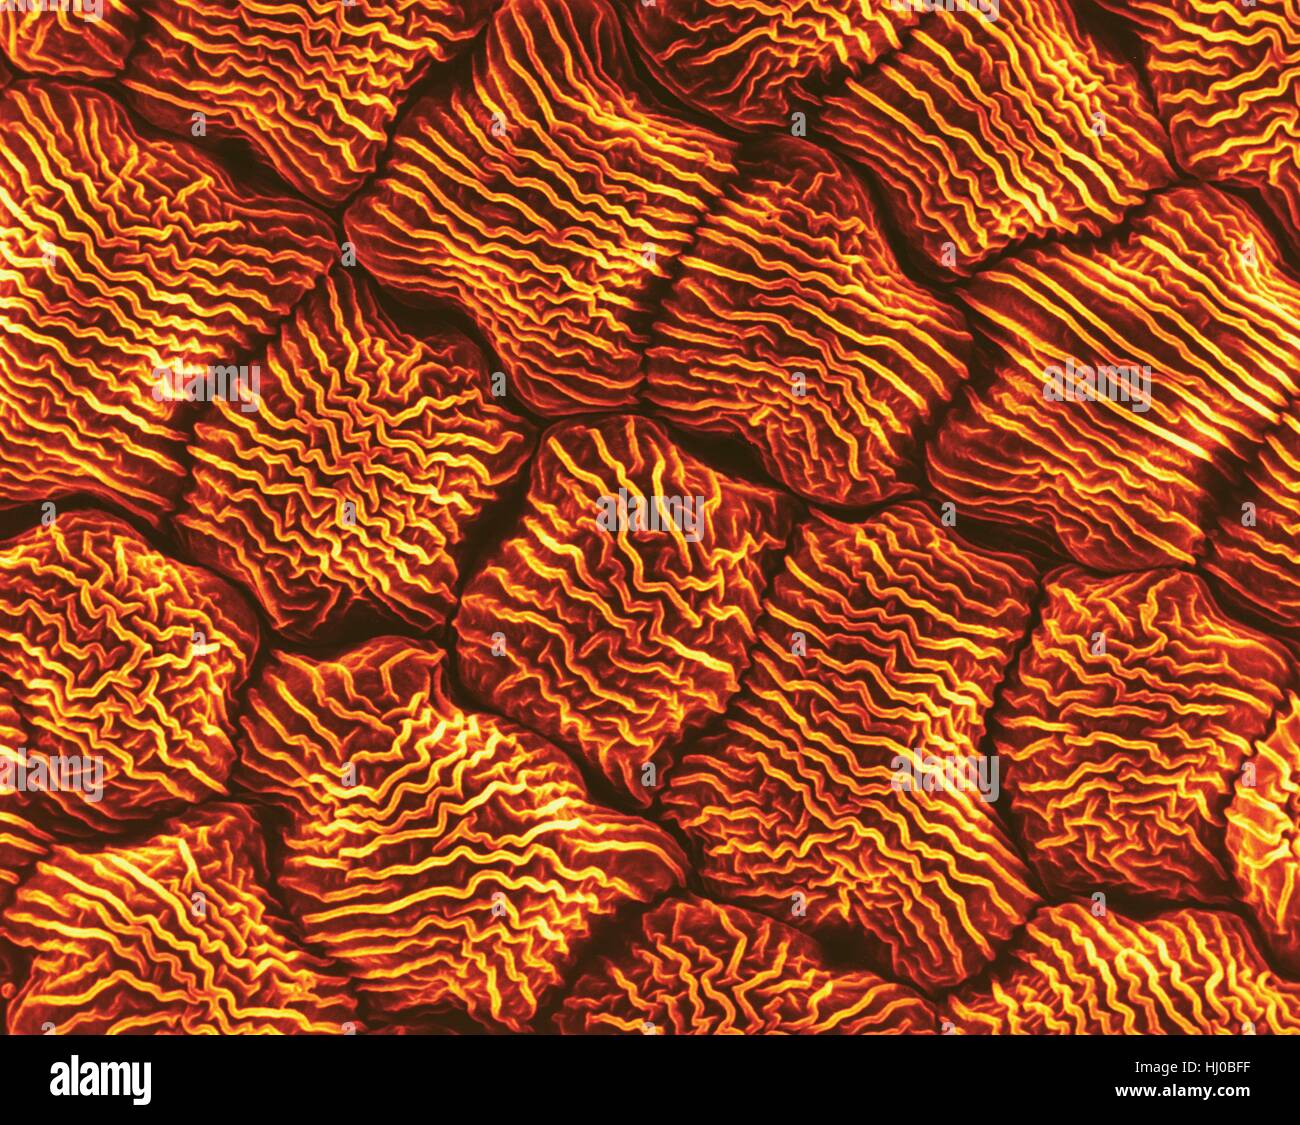 Wild mustard flower petal surface (Brassica kaber),coloured scanning electron micrograph (SEM).Individual cells show an elaborate surface texture.Wild mustard pollen (Brassica kaber) is herbaceous flowering plant (also known as charlock or field mustard) in family Brassicaceae.Other names for this Stock Photo